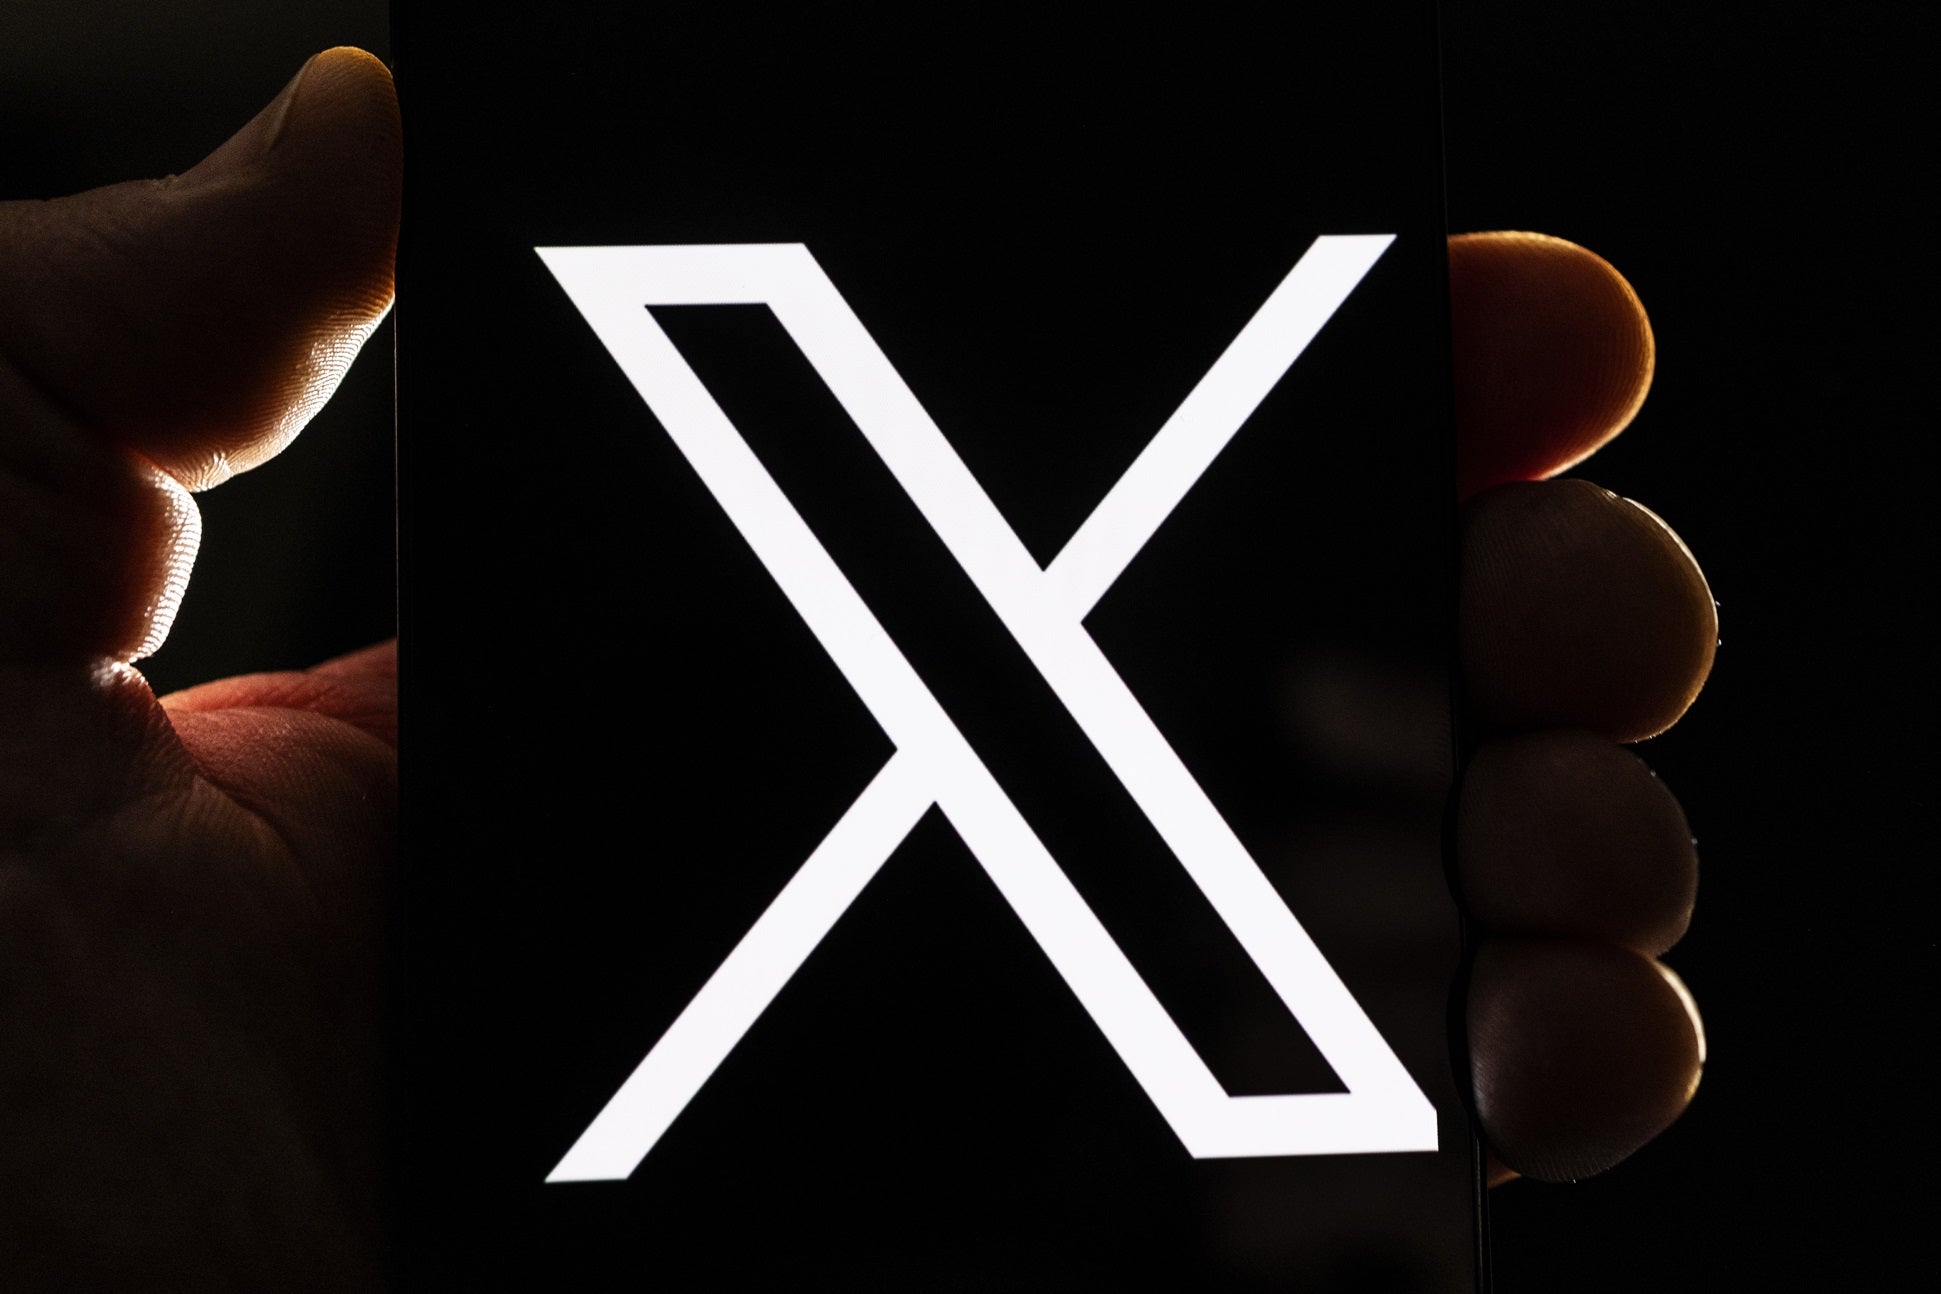 The X logo on a smartphone on 24 July, 2023 in London, England